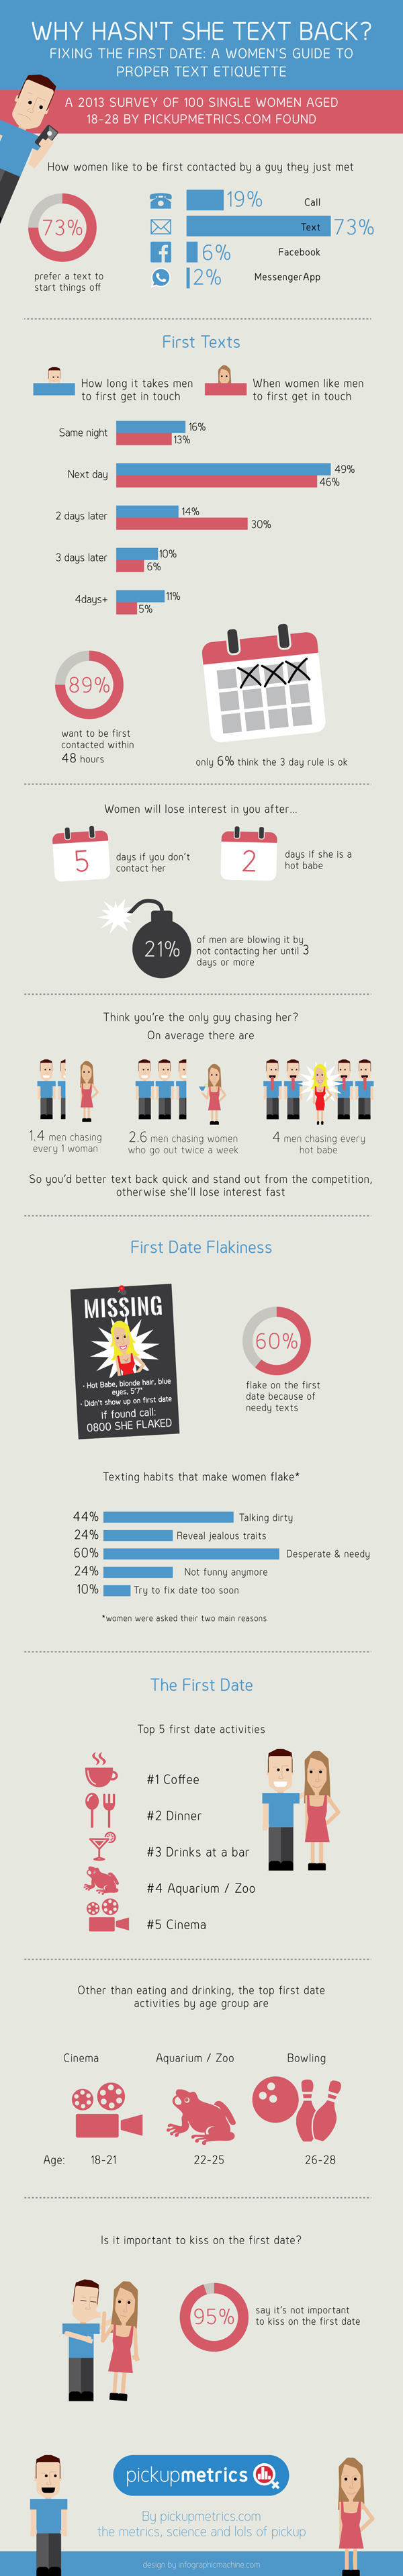 How to Flirt a Girl by Texting-Infographic